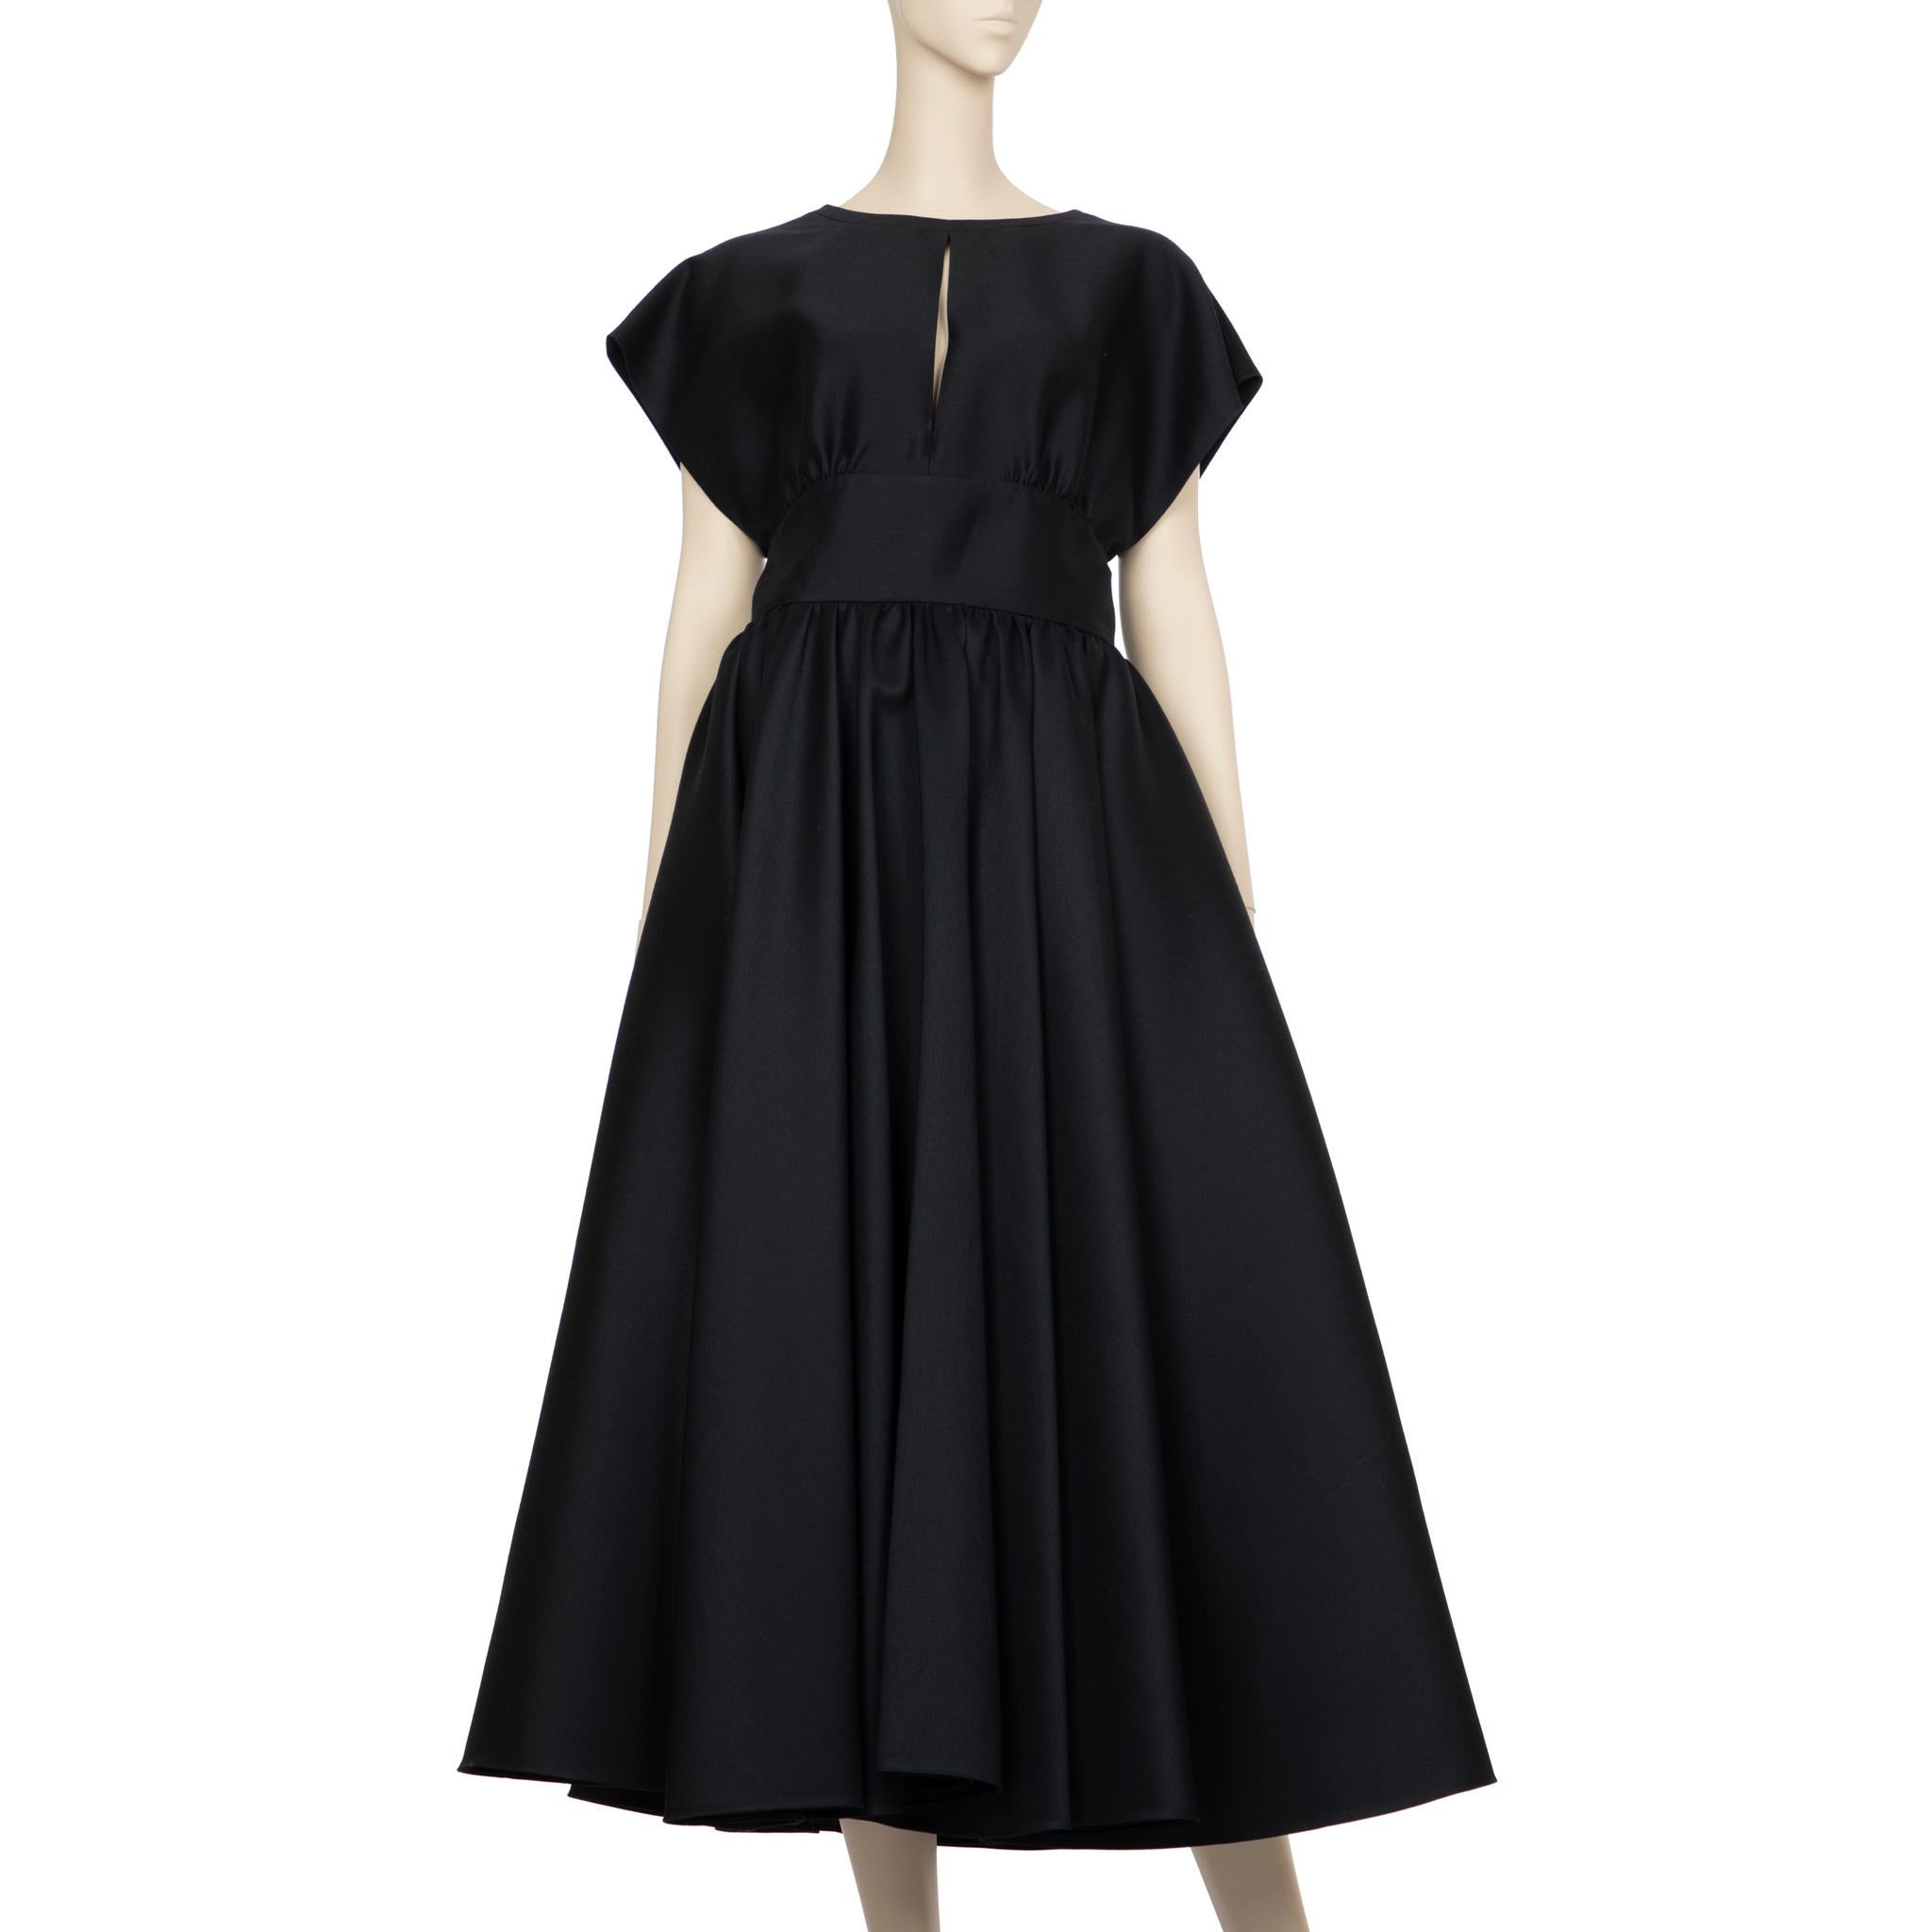 Christian Dior Sleeveless Dress 42 FR In New Condition For Sale In DOUBLE BAY, NSW